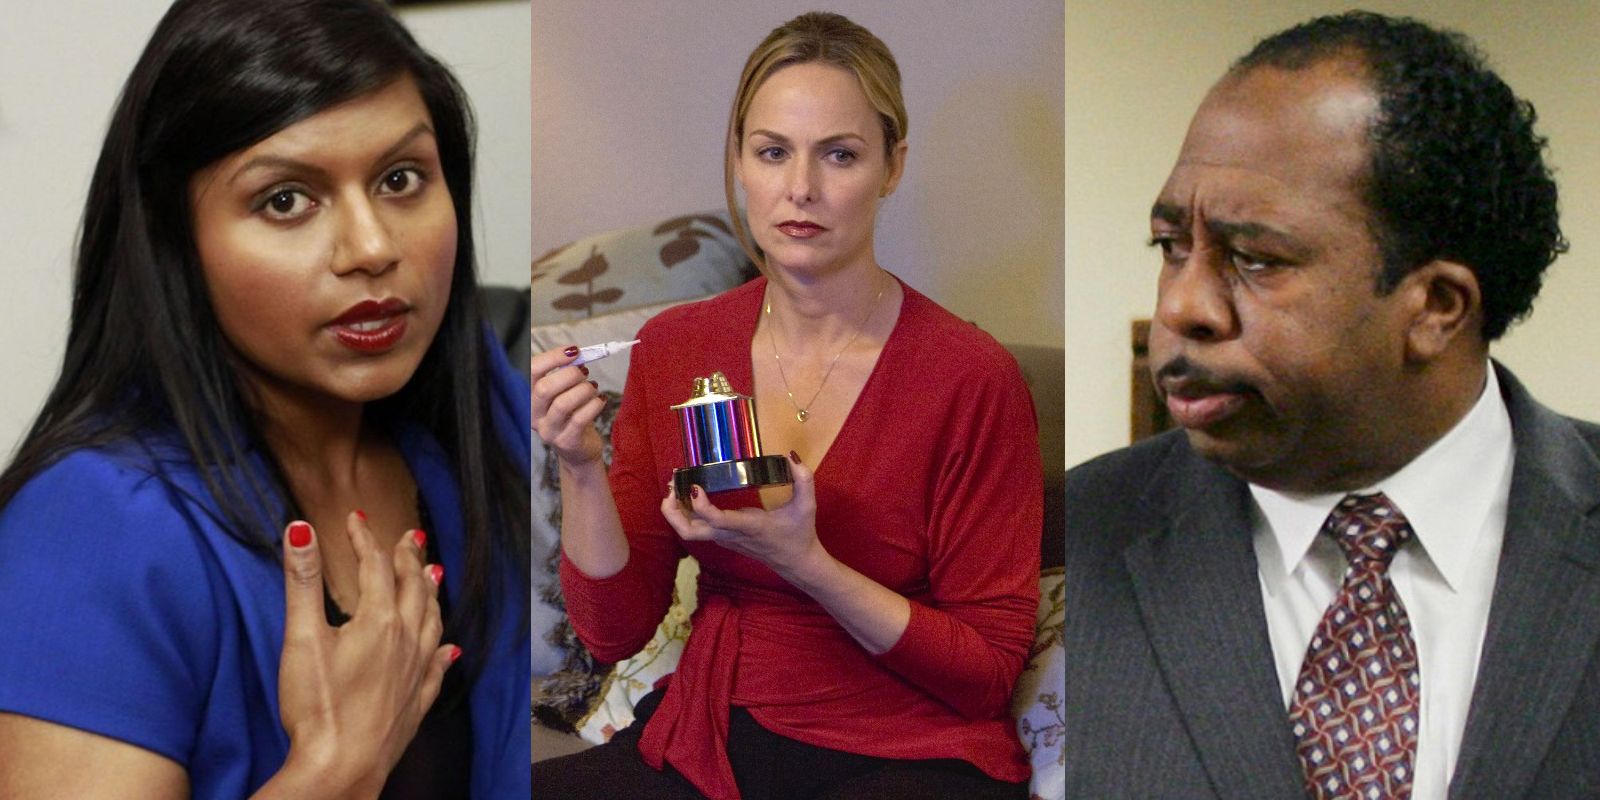 Split image of Kelly Kapoor, Jan Levinson, and Stanley Hudson from The Office